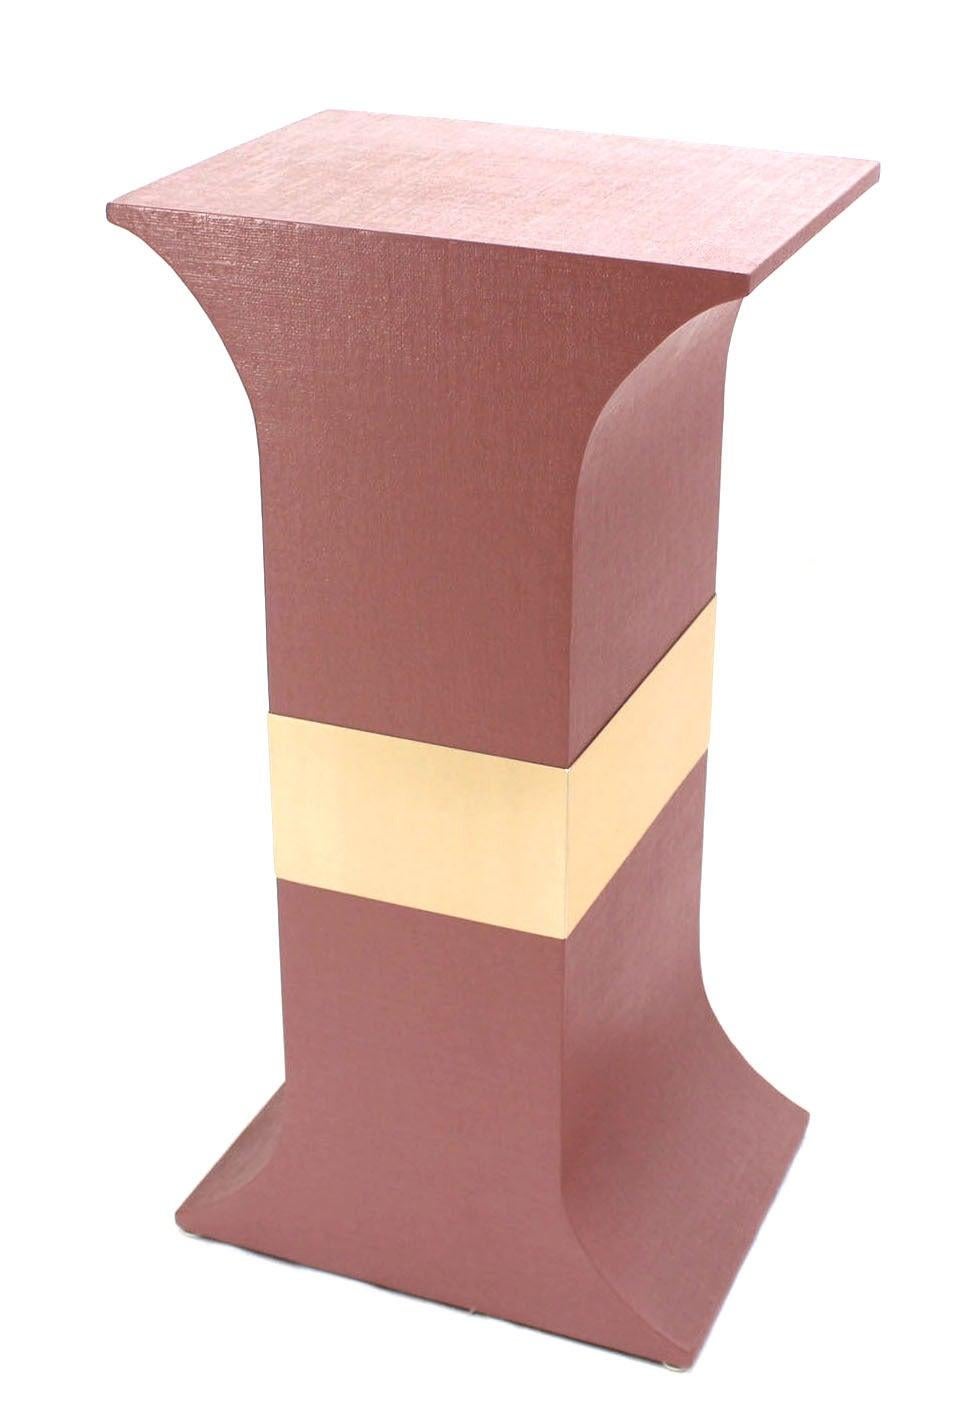 Grasscloth Wrapped Three Mid Century Modern Pink Lacquer Brass Trim Pedestals For Sale 1